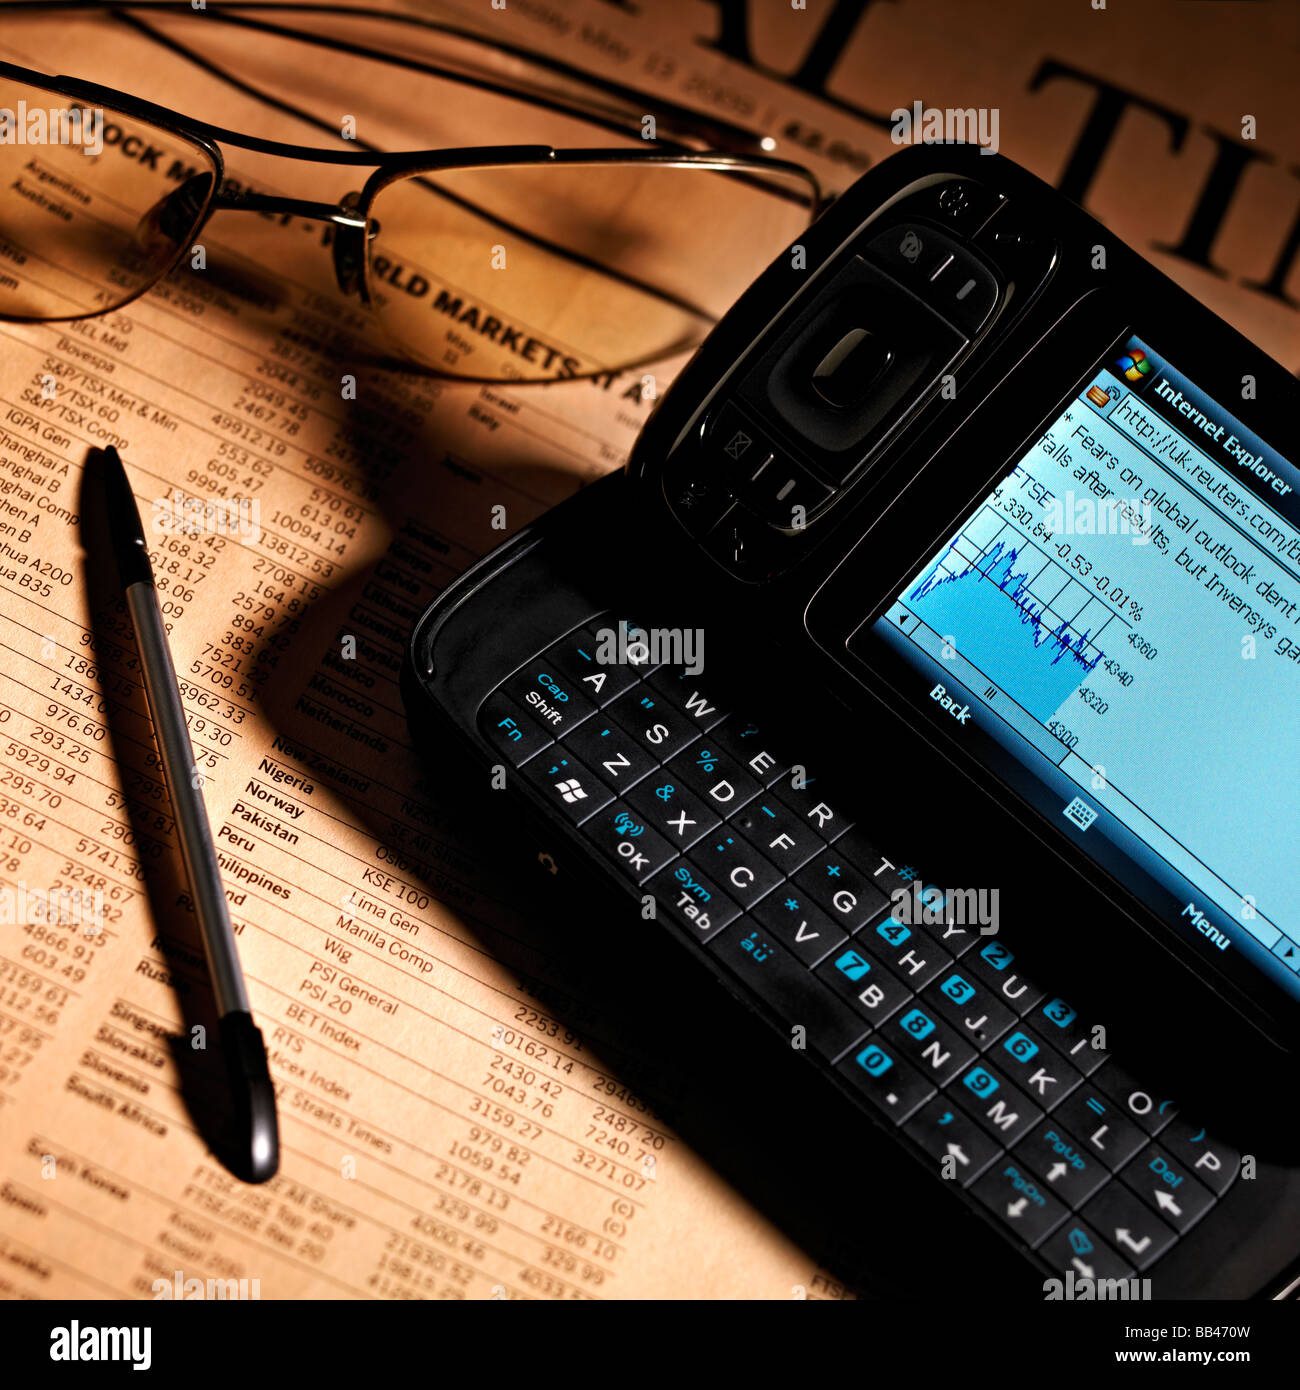 MOBILE PHONE PDA INTERNET ACCESS WITH NEWSPAPER FINANCIAL PAGE Stock Photo